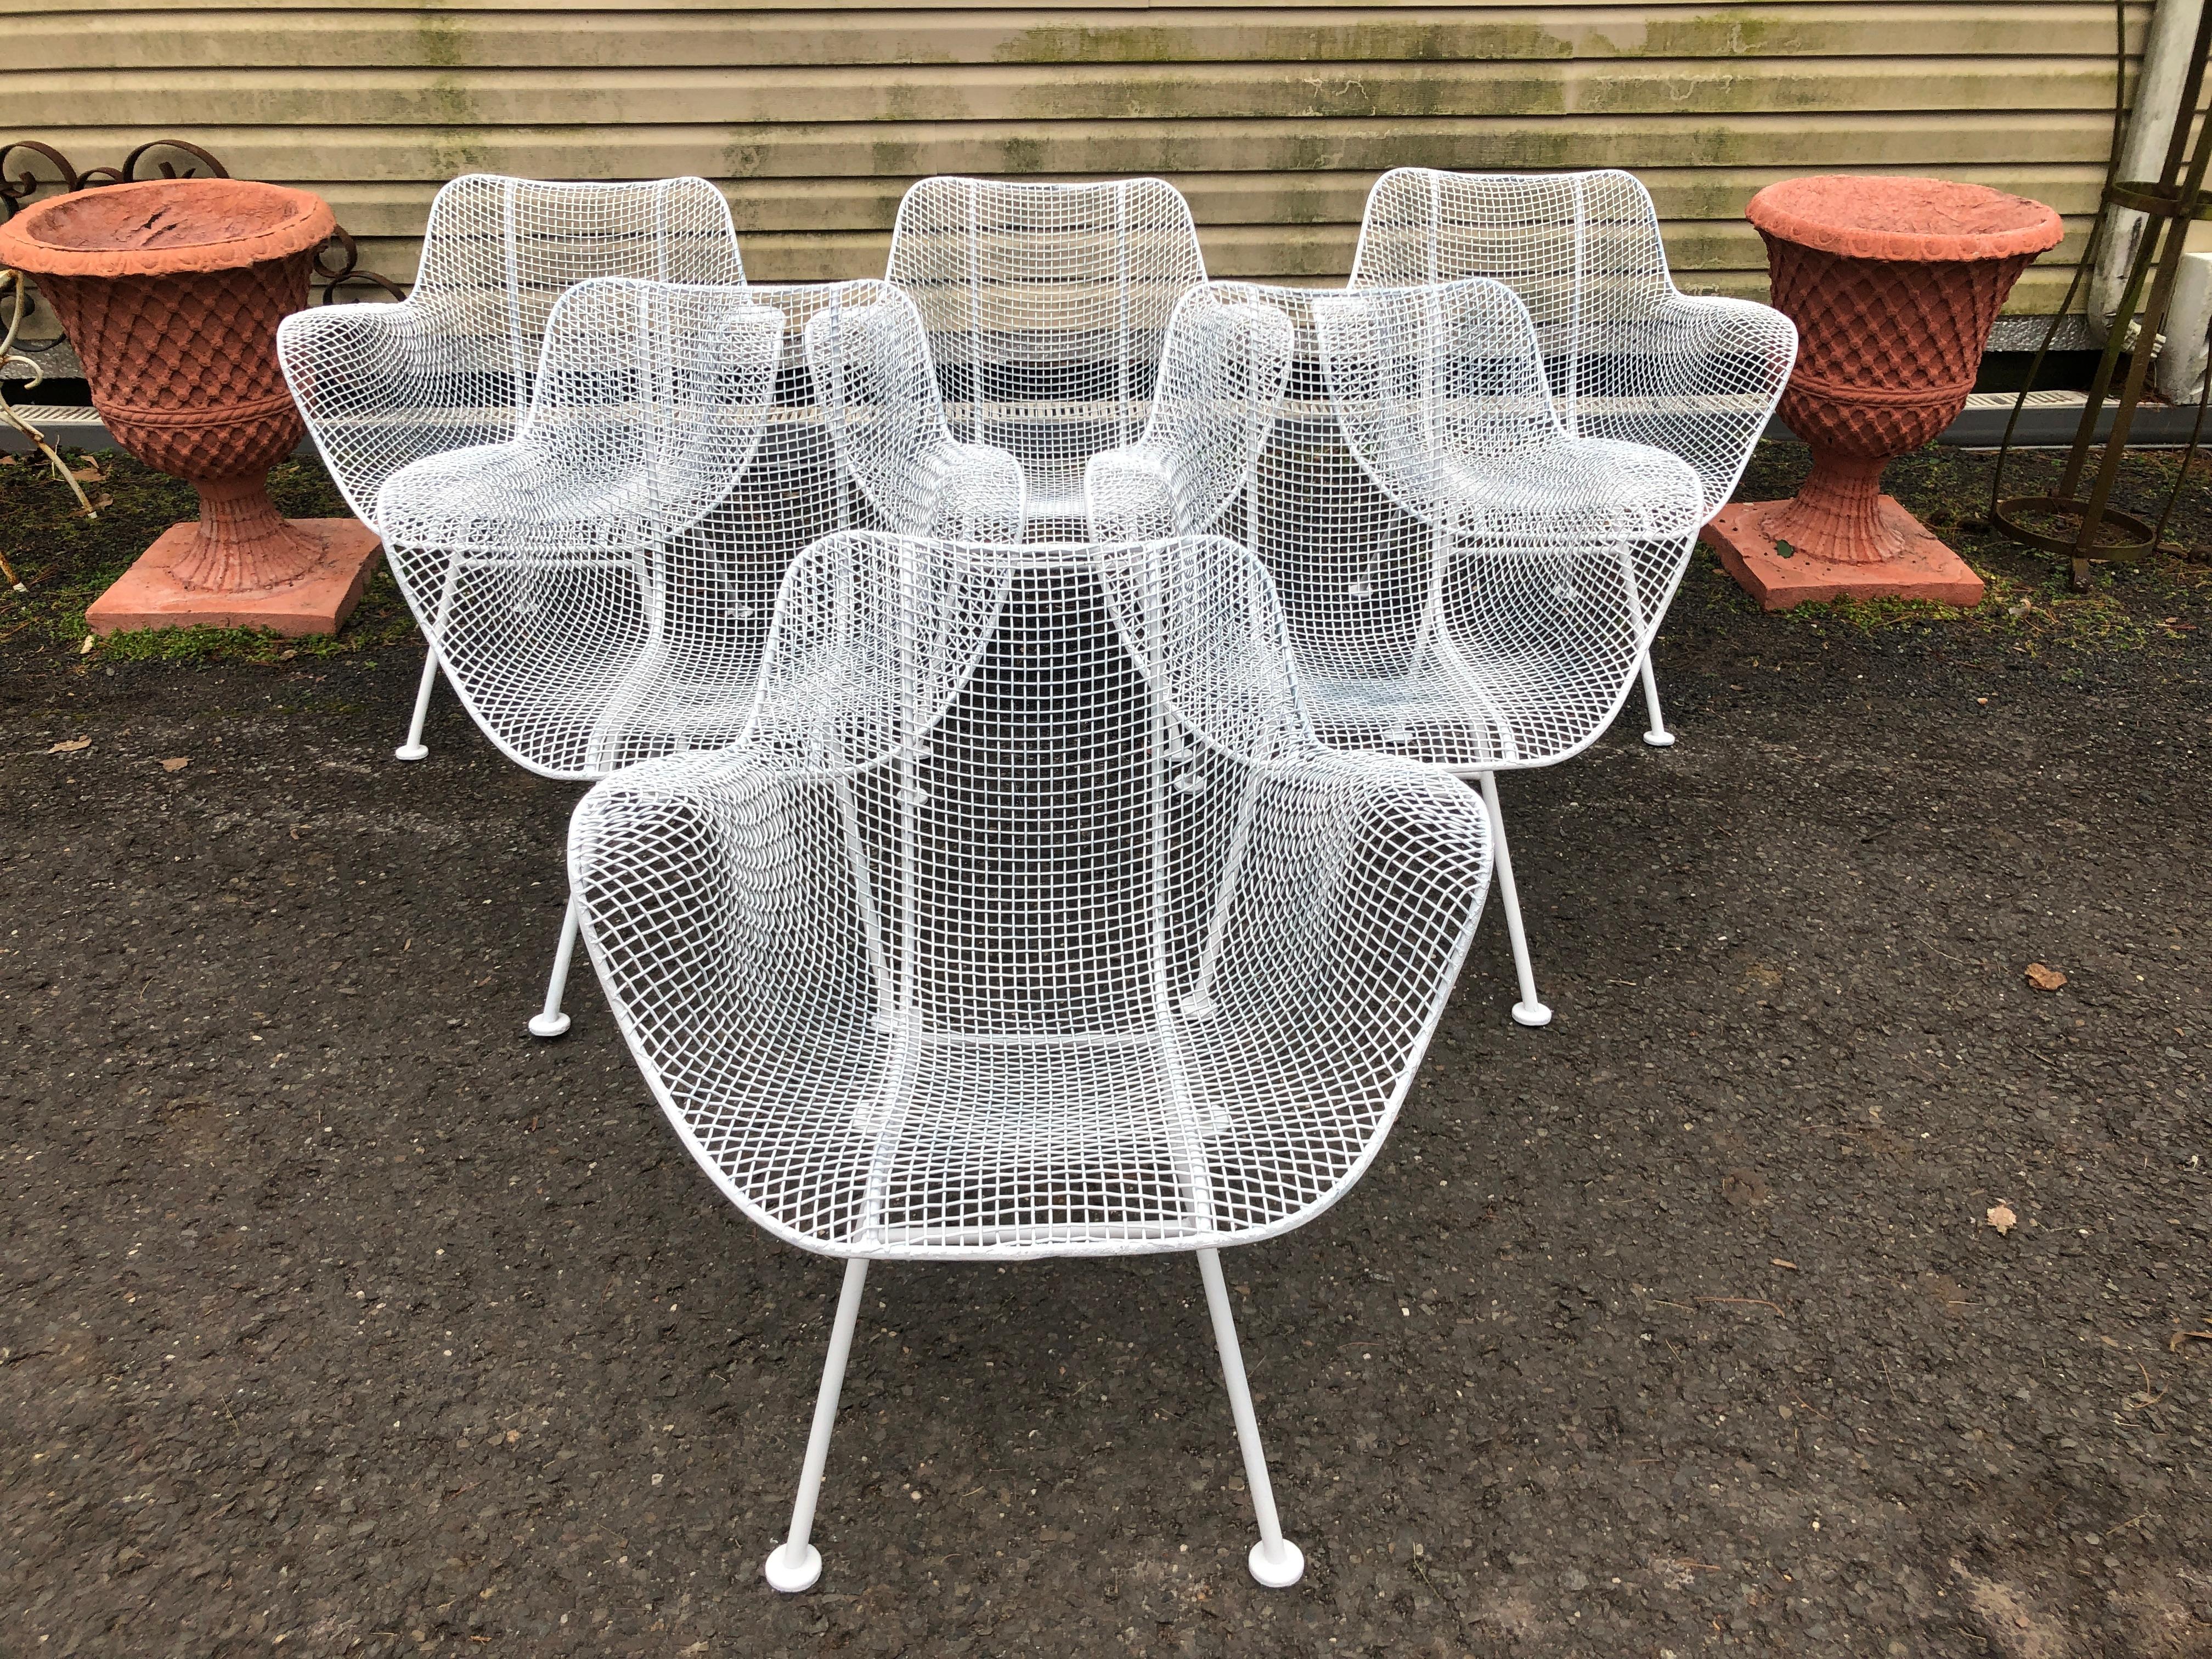 Wonderful set of 6 mid-century mesh patio chairs.  These 'Sculptura' patio chairs are designed by Russell Woodard. Executed in iron and woven steel, these chairs feature an intricate interlacing of steel wires, resulting in a linear grill effect.